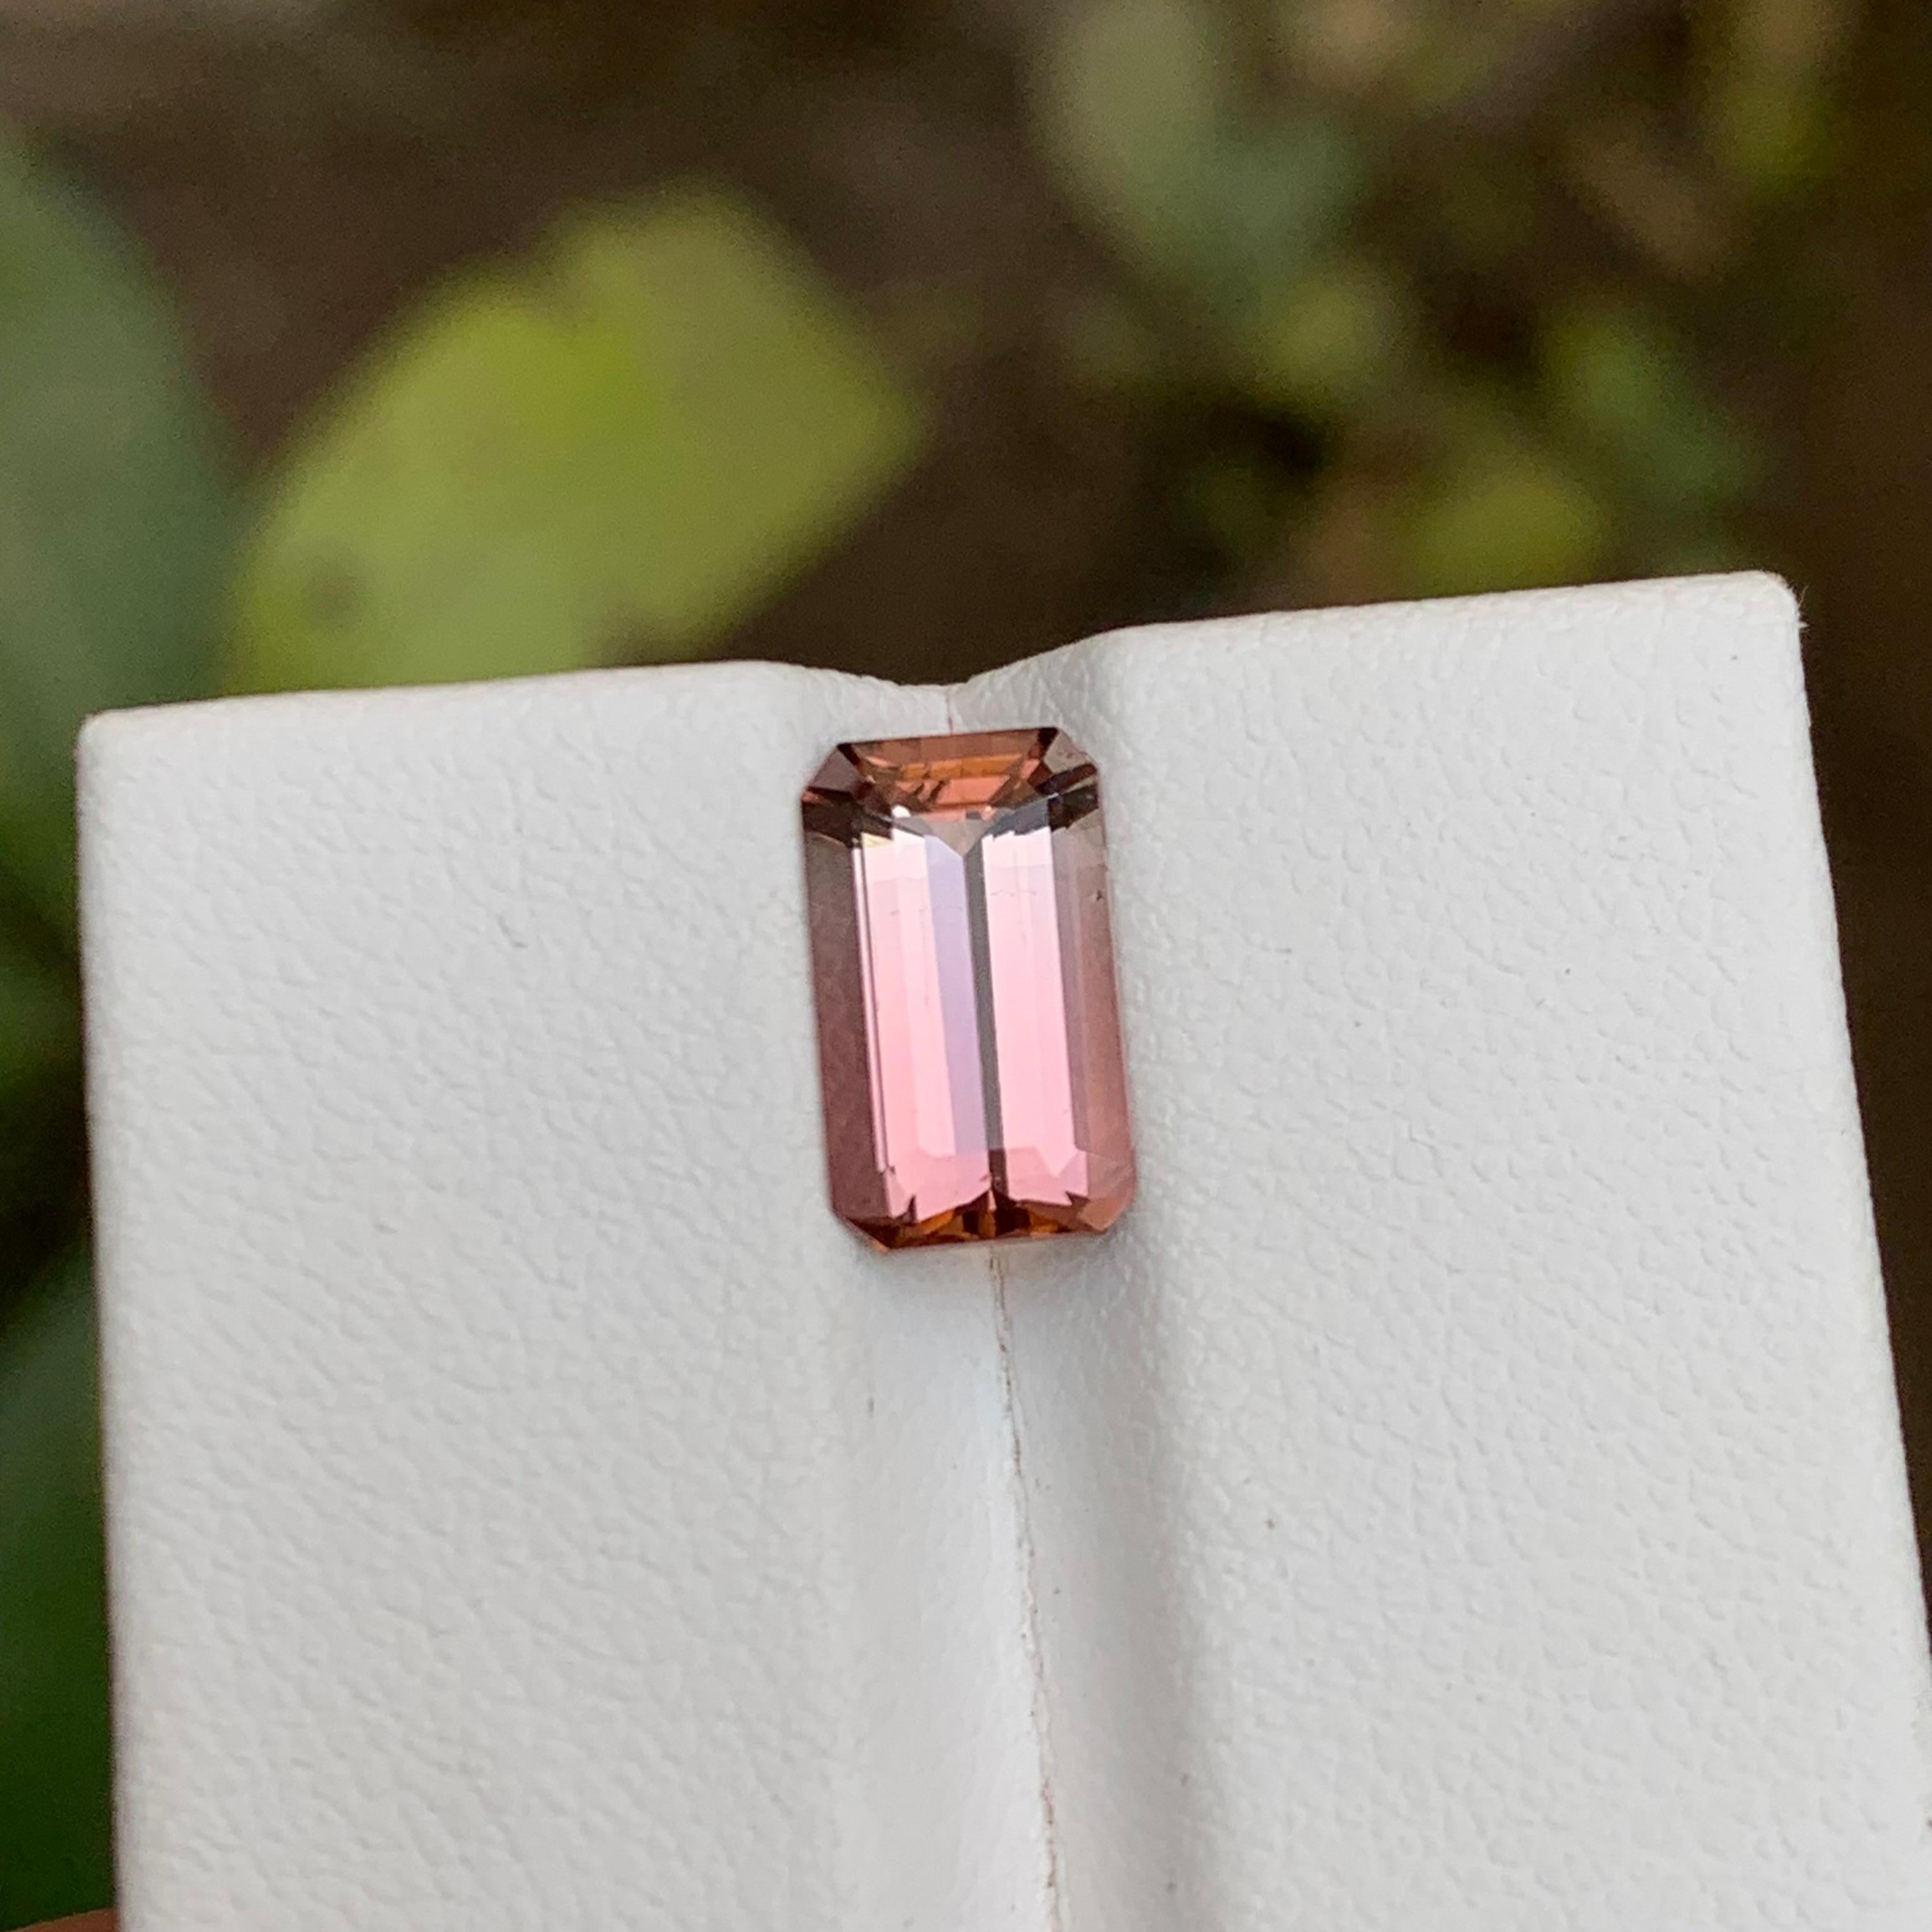 Contemporary Rare Pink Natural Tourmaline Loose Gemstone 2.45 Ct Emerald Cut for Ring/Pendant For Sale